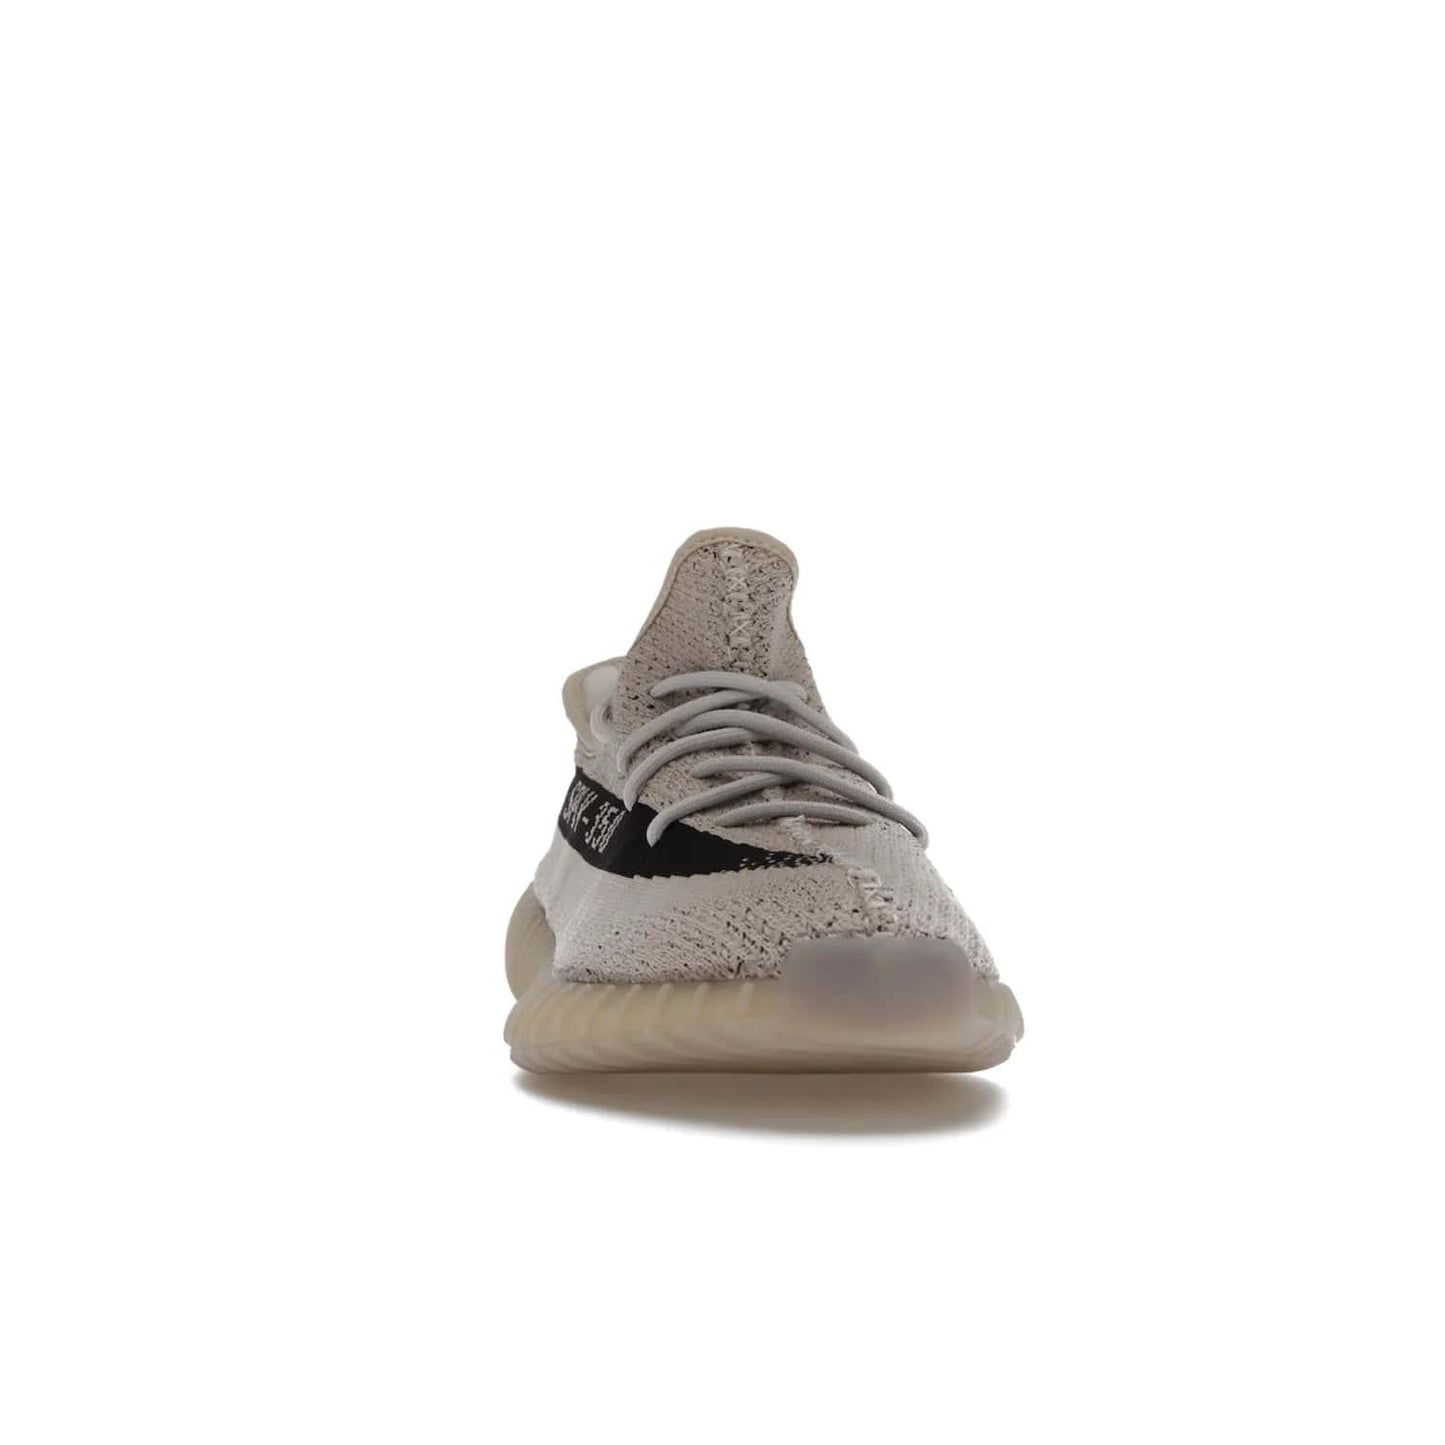 adidas Yeezy Boost 350 V2 Slate - Image 9 - Only at www.BallersClubKickz.com - Adidas Yeezy Boost 350 V2 Slate Core Black Slate featuring Primeknit upper, Boost midsole and semi-translucent TPU cage. Launched on 3/9/2022, retailed at $230.